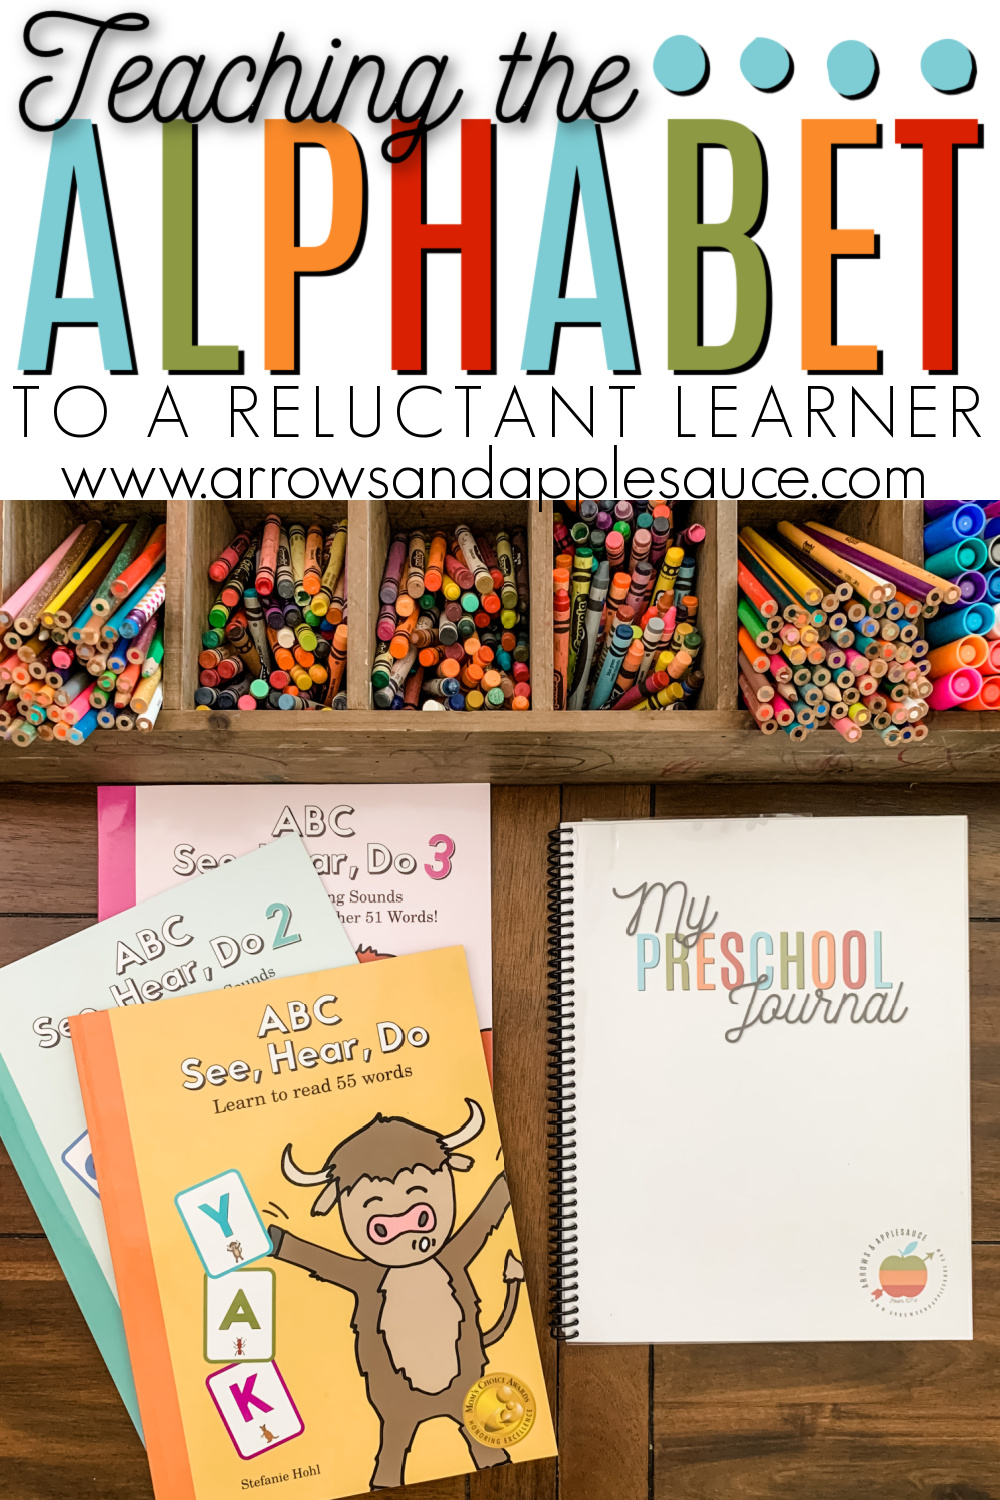 Individual learning styles can make teaching the alphabet a challenge, but this tool has made such a difference for my reluctant learner! #teachingthealphabet #preschoolathome #alphabetactivity #homeschoolpreschool #abcs #preschooljournal #learningthealphabet #abcseeheardo